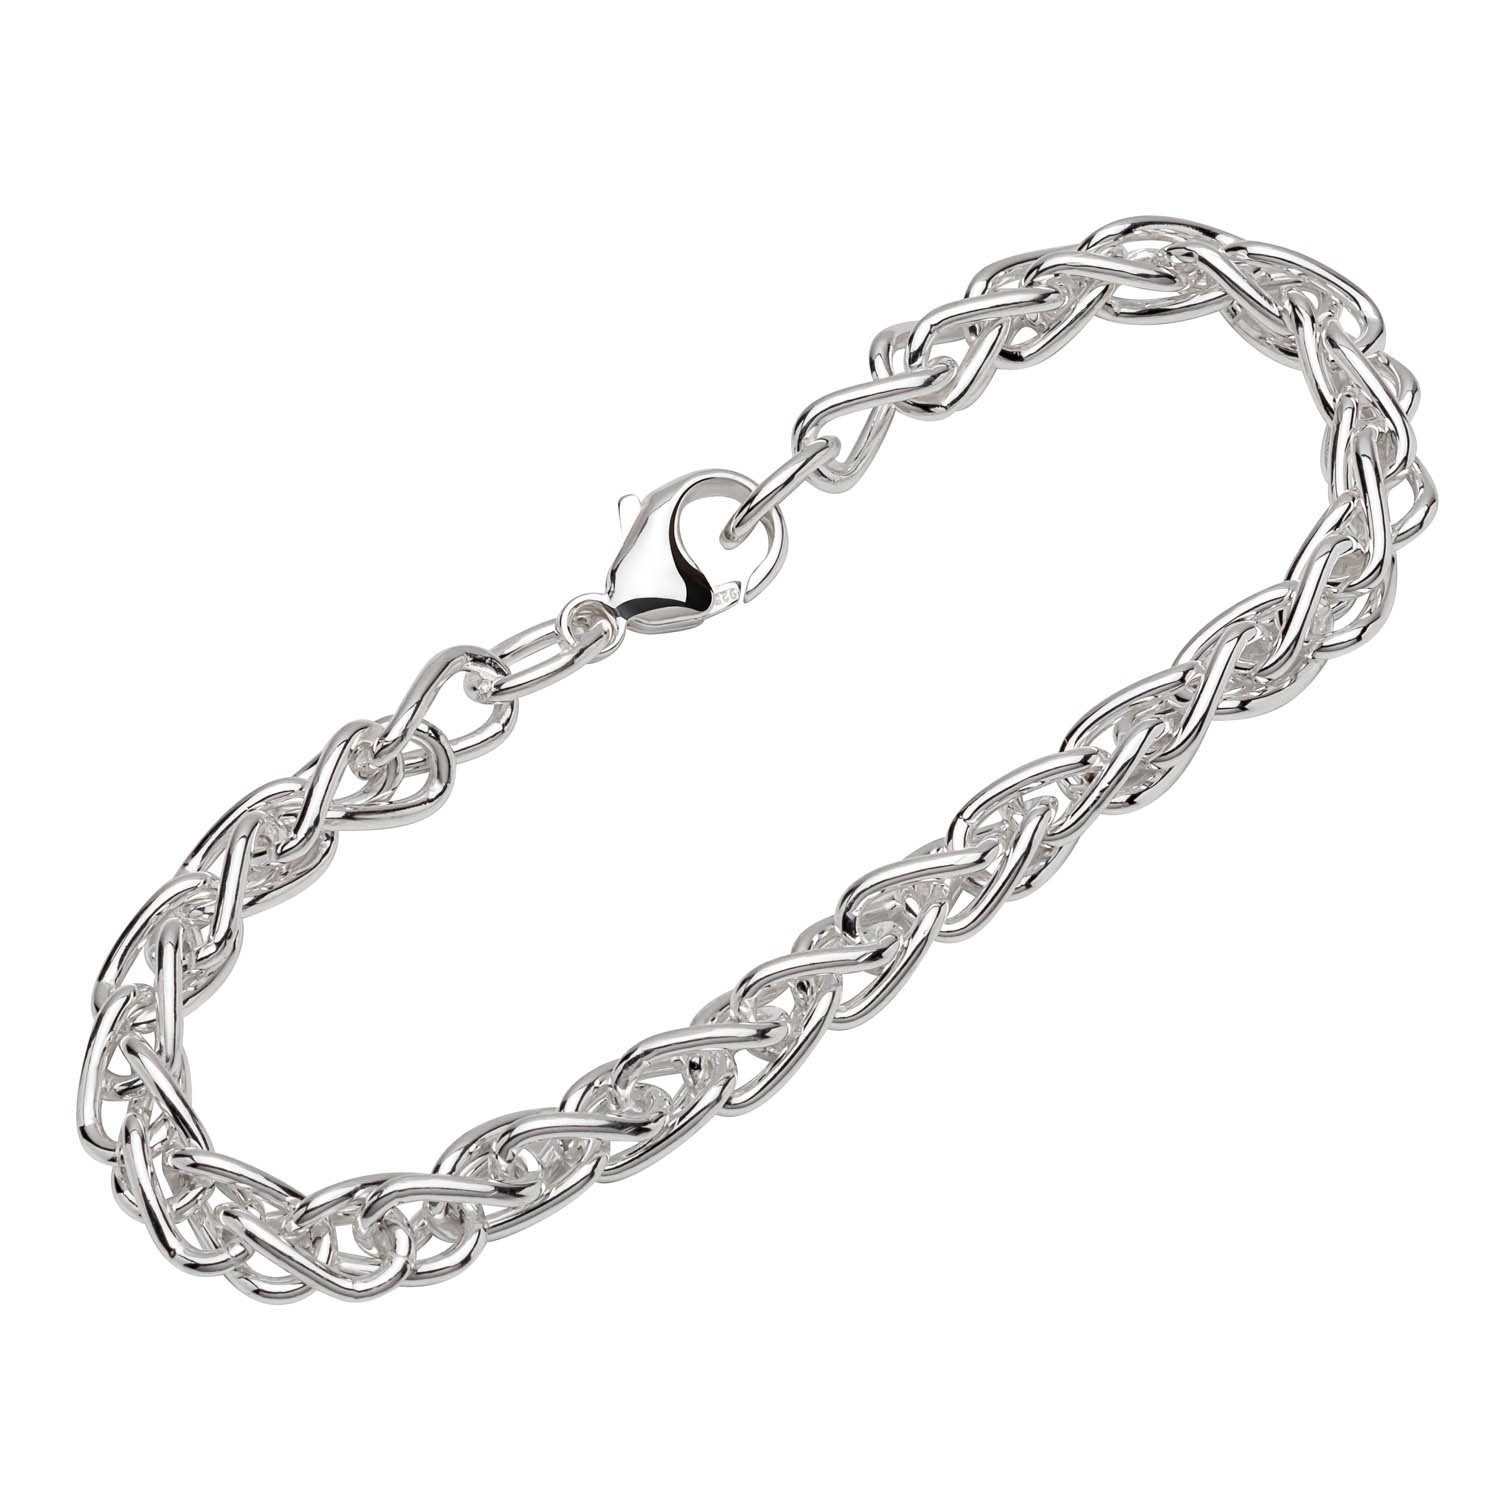 NKlaus Silberarmband Armband 925 Sterling Silber 22cm Zopfkette rund He (1 Stück), Made in Germany